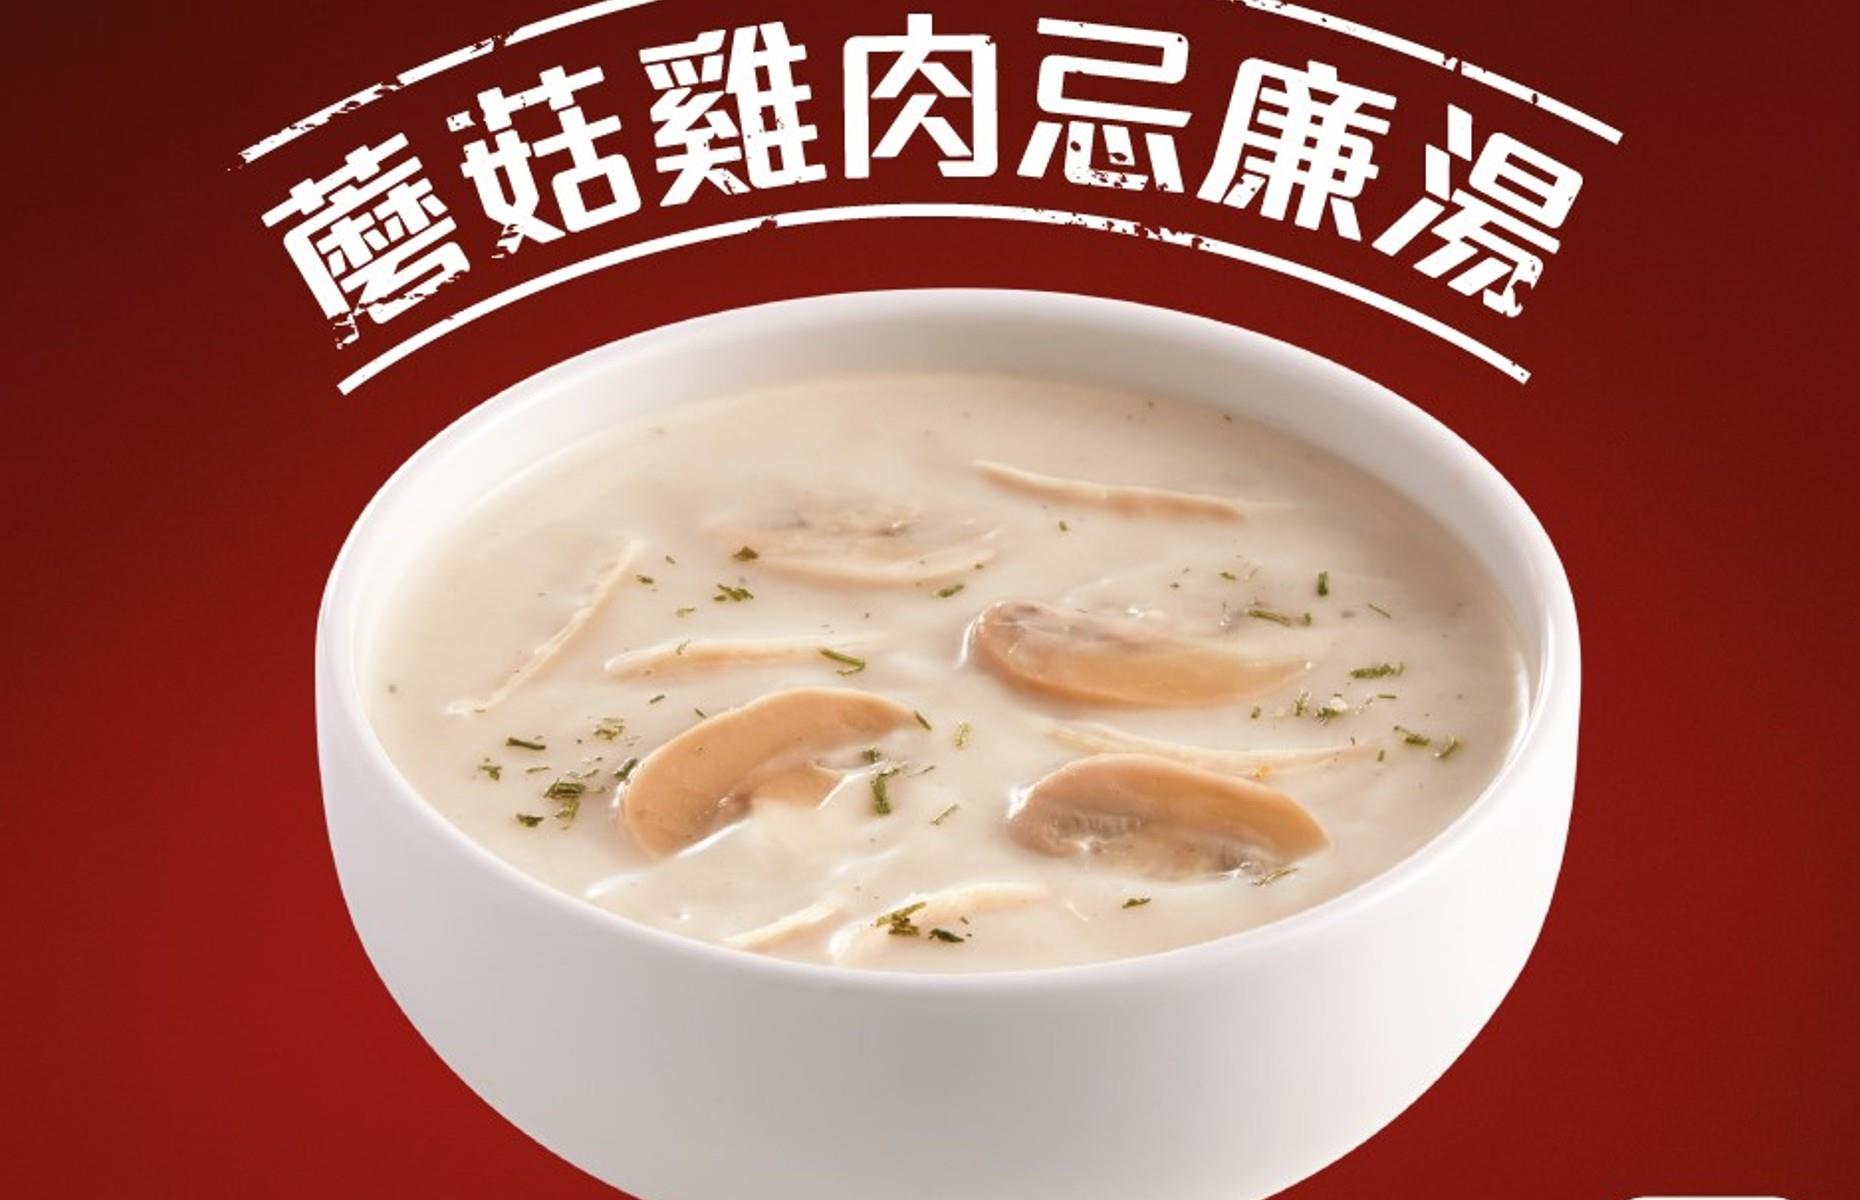 <p>Somewhat surprisingly, soup is common on KFC menus around the world and particularly in Asian markets. Do you remember the Deep-Fried Corn Soup sold in Japan in 2013 that sent the internet into a frenzy? Corn, mushroom and chicken soups are all regularly sold at KFC Hong Kong in the winter months. Described as “fragrant and creamy”, this chicken and mushroom combo is a great when it's chilly outside.</p>